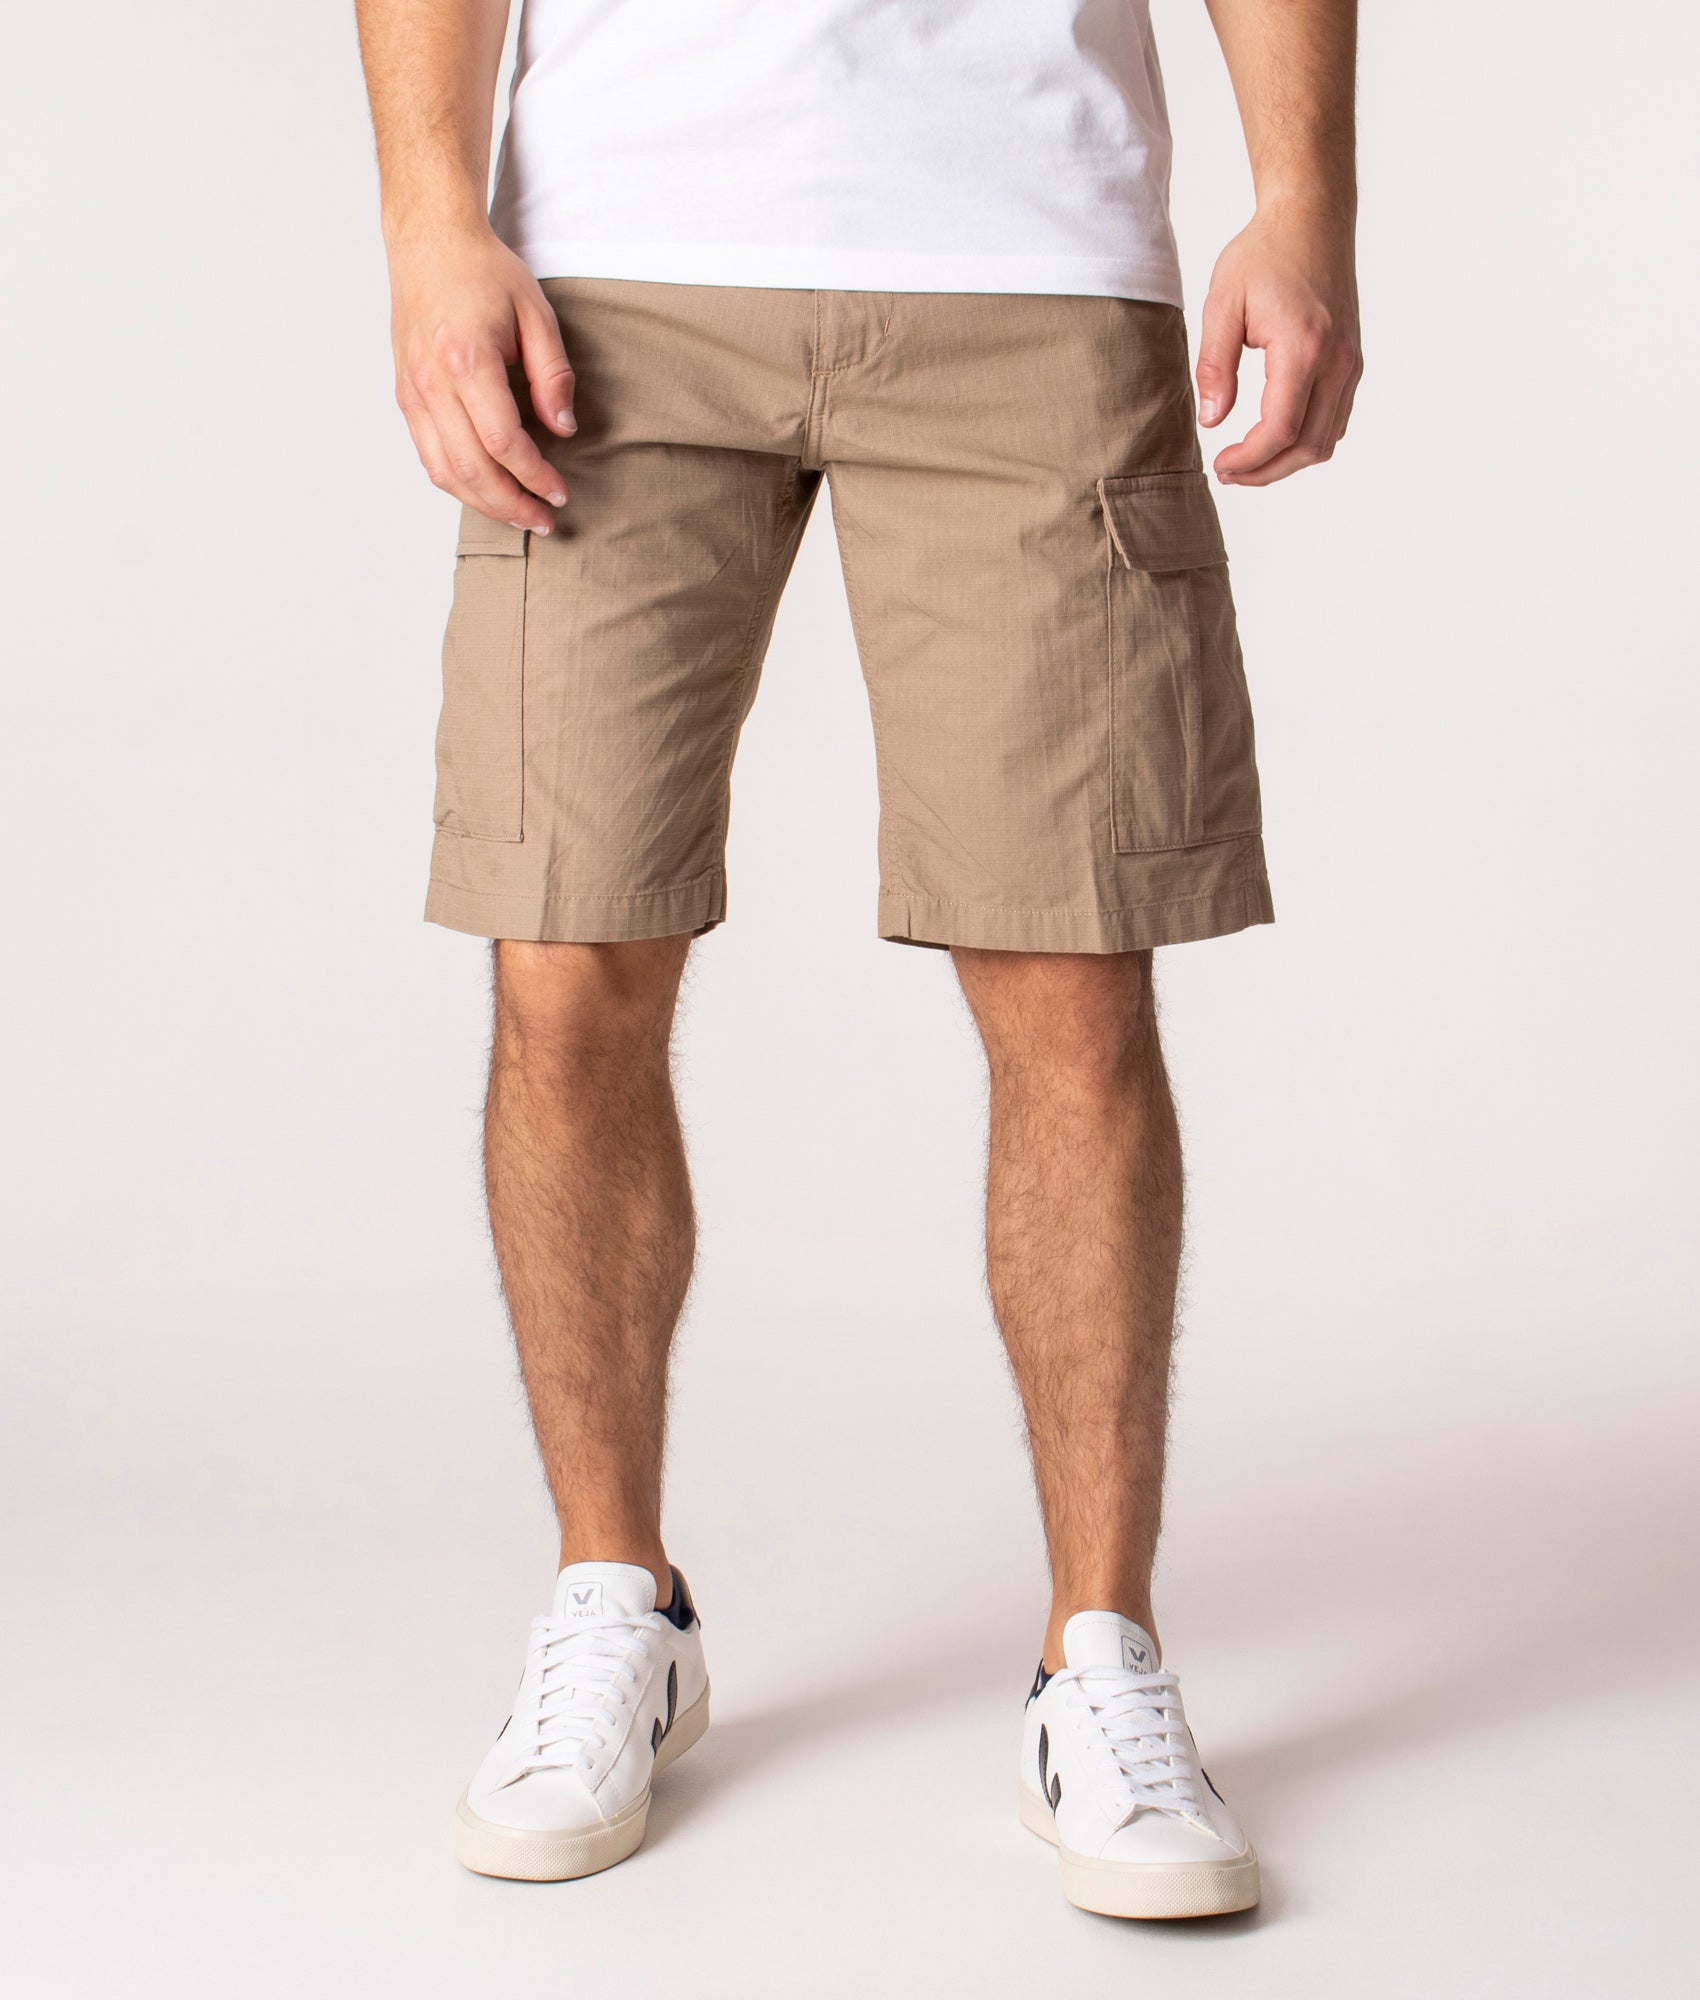 Carhartt WIP Mens Slim Fit Aviation Cargo Shorts - Colour: 8Y0200 Leather Rinsed - Size: 30W